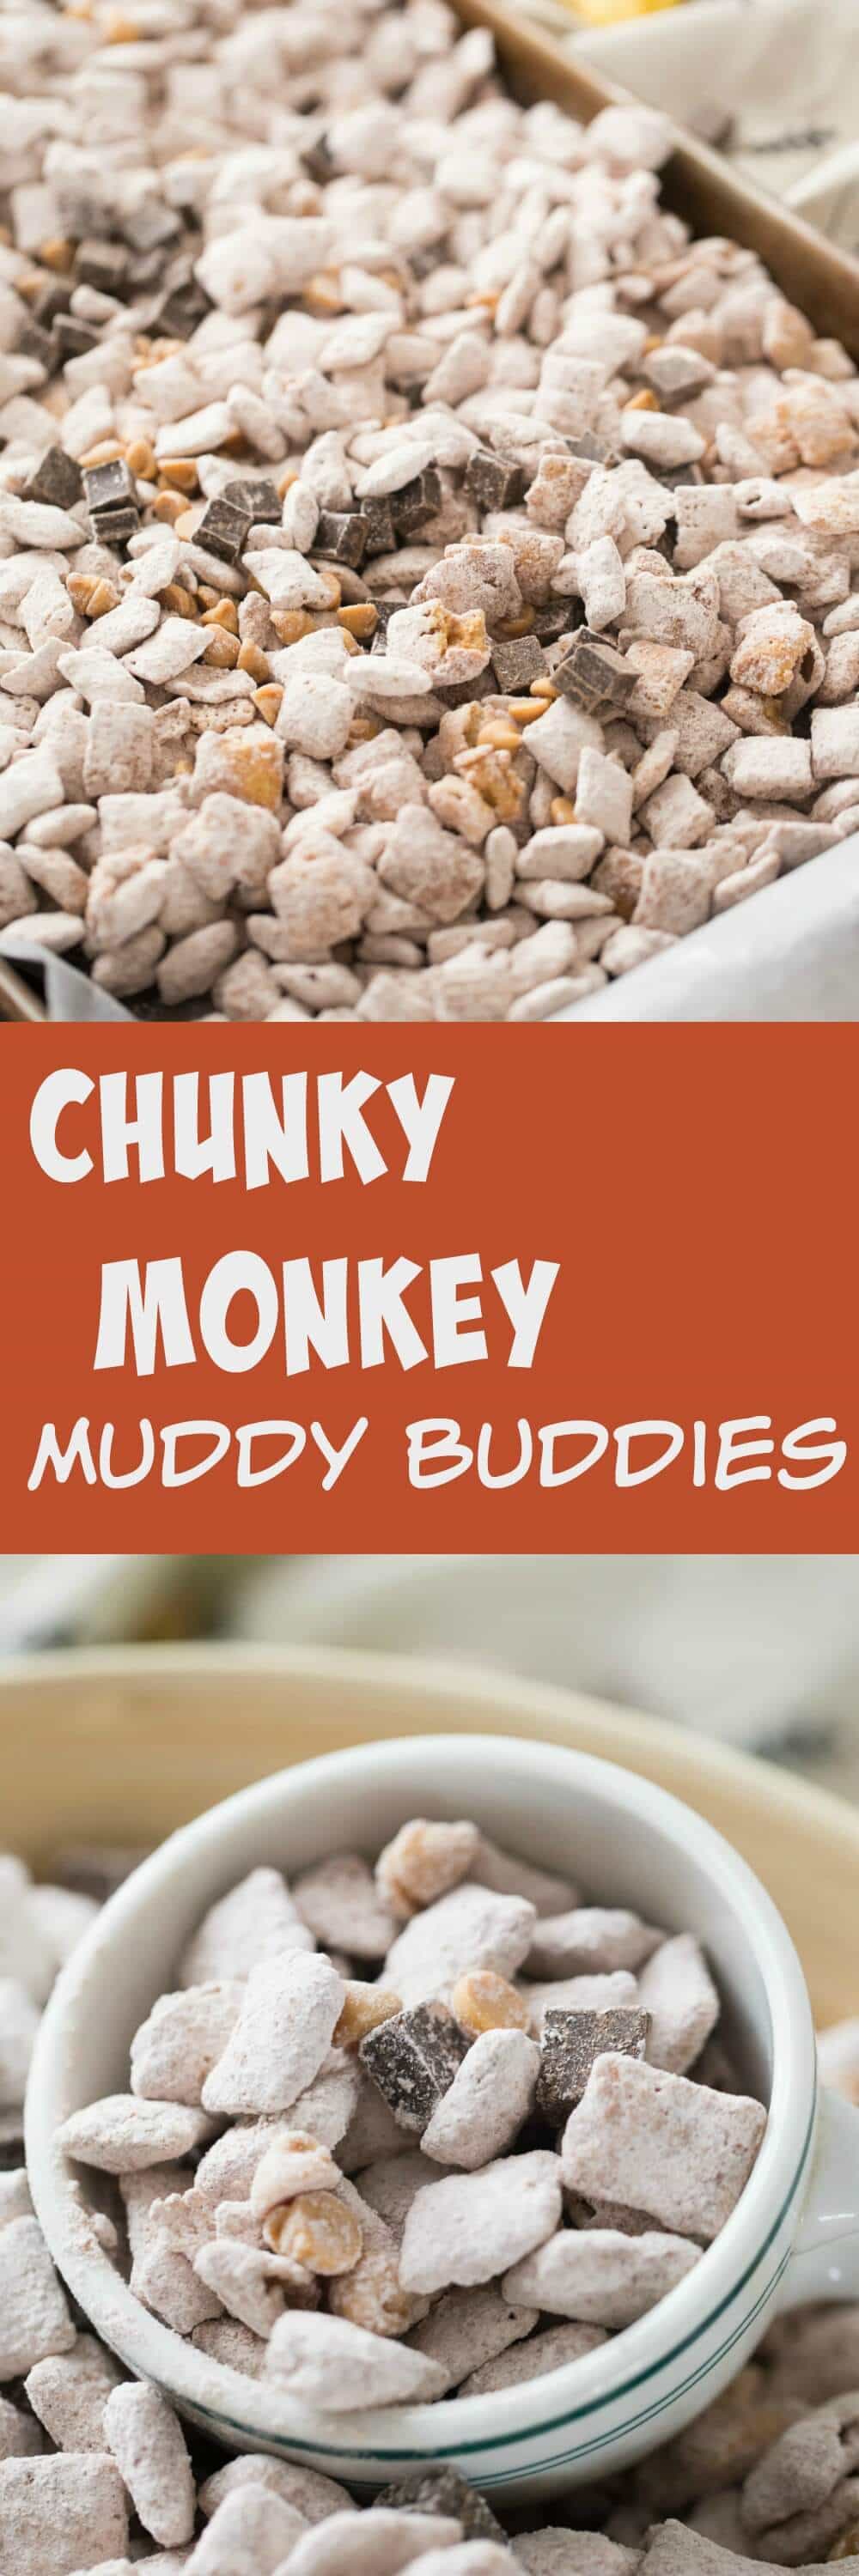 This chunky monkey snack mix is so simple to make; it’s a great recipe to make with kids! Peanut butter and chocolate work perfectly in this fun muddy buddy recipe!